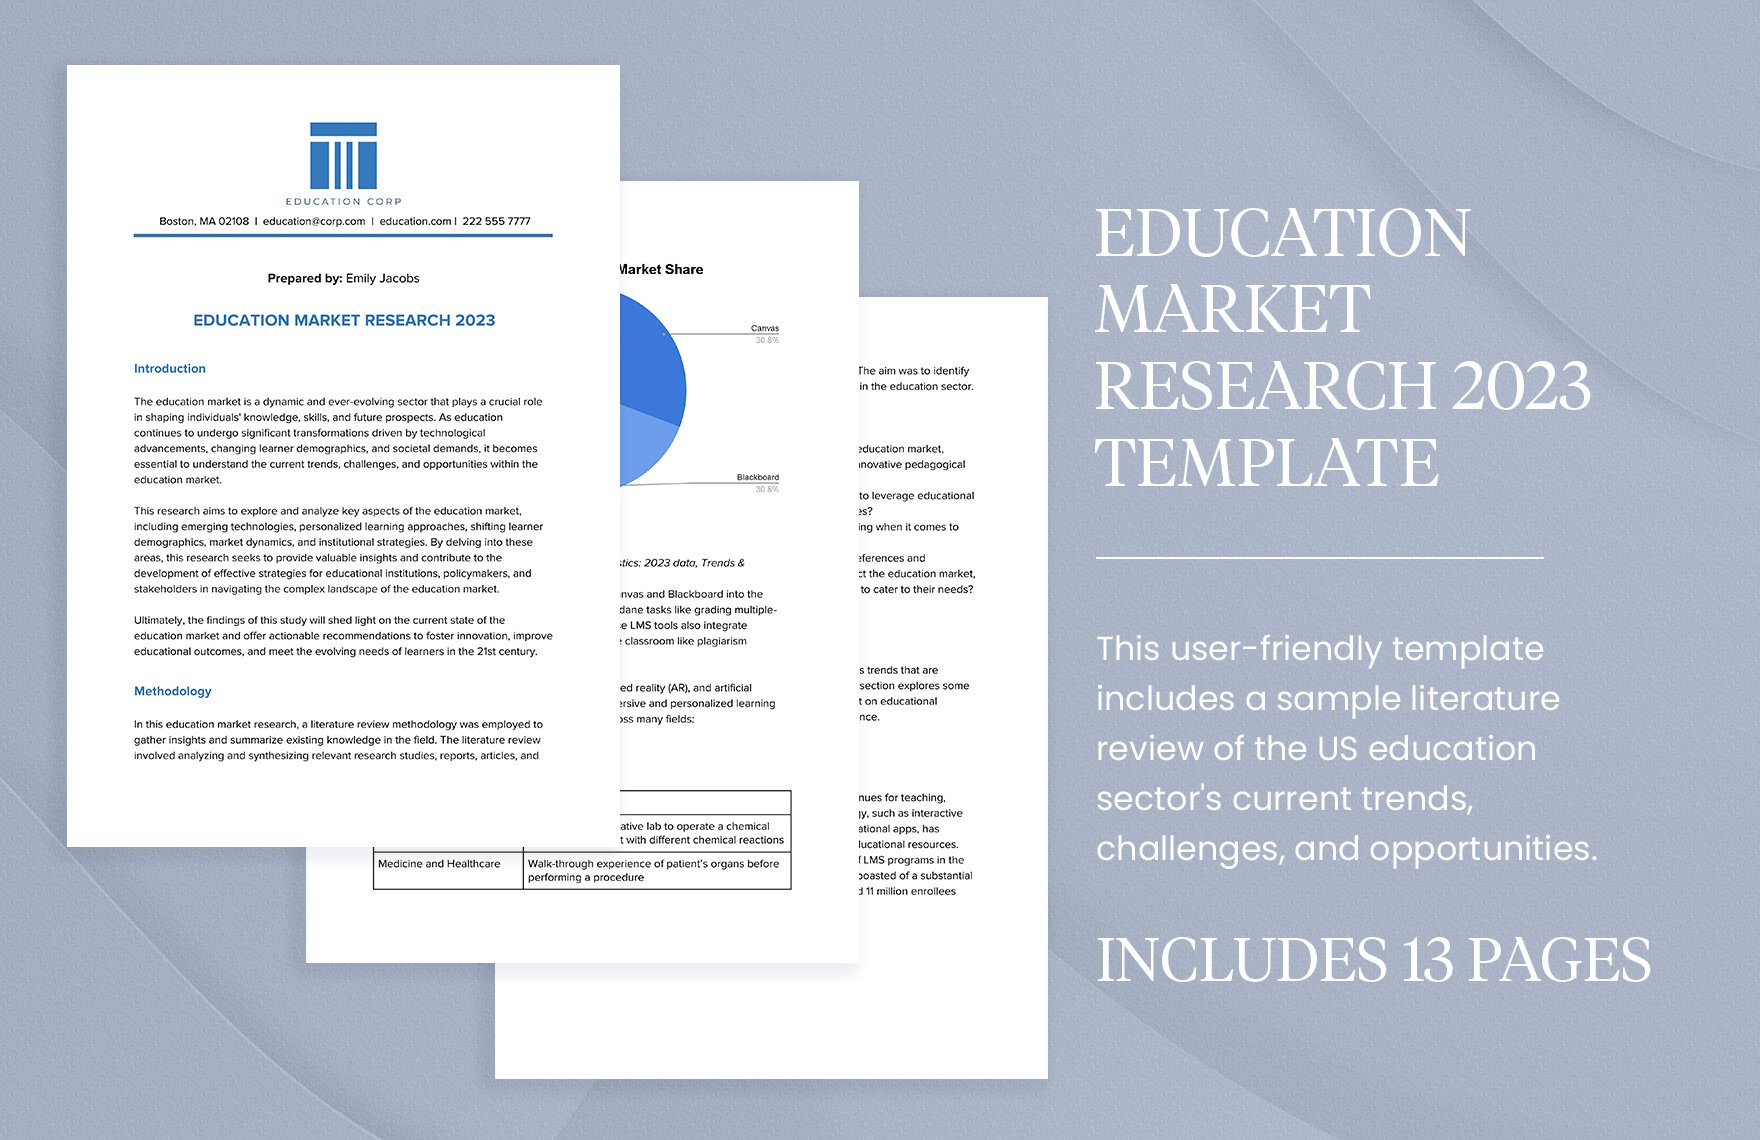 Education Market Research 2023 Template